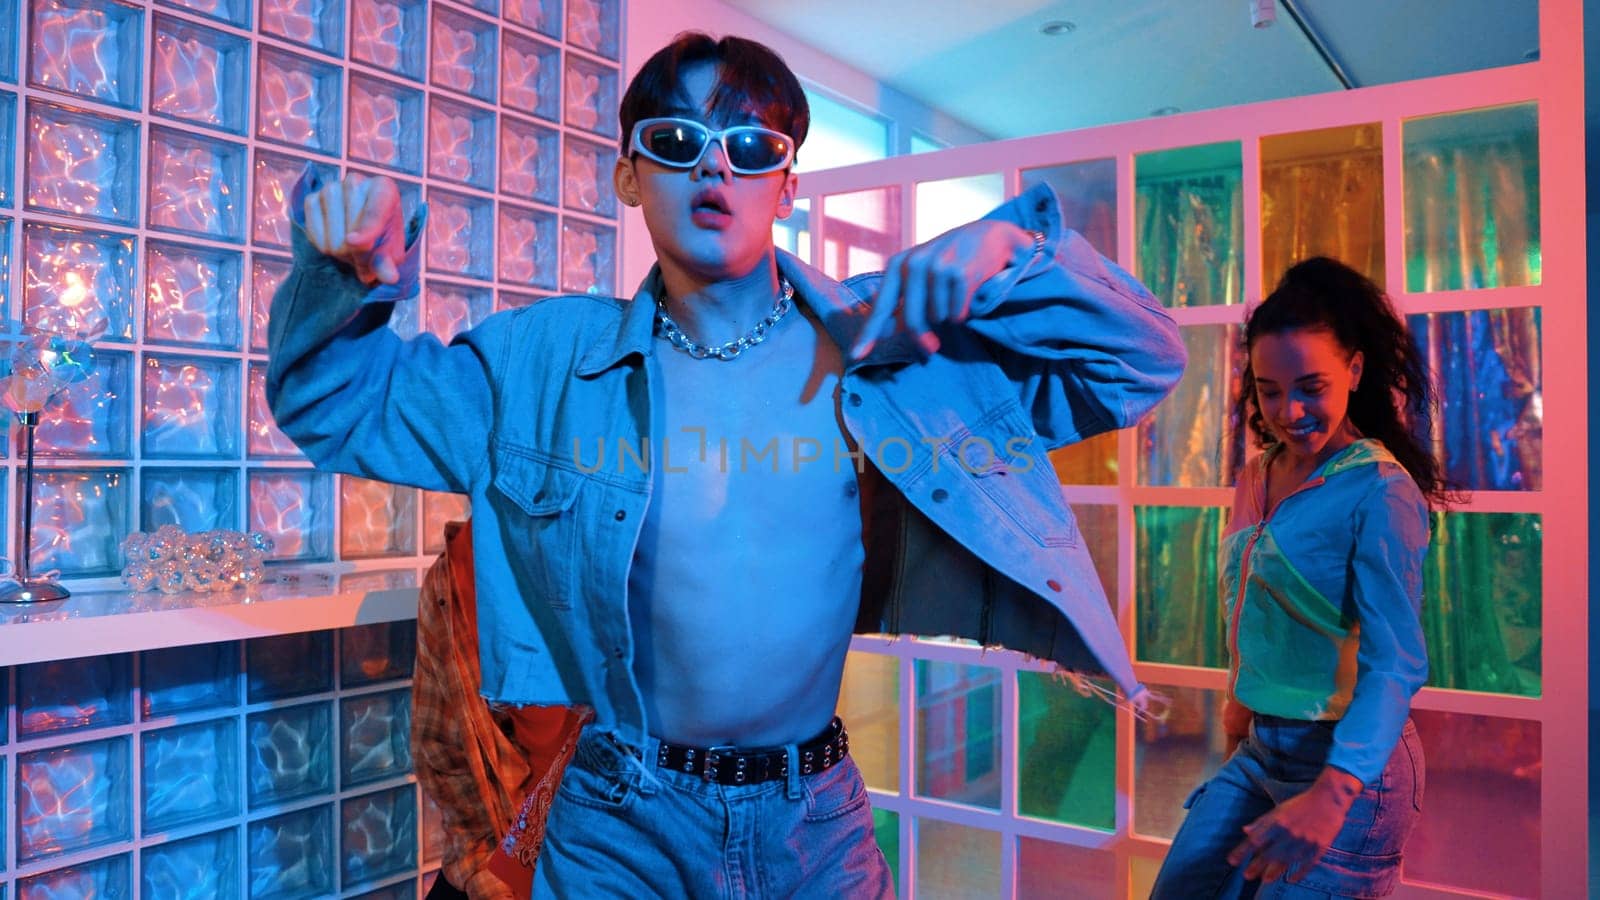 Asian man moving his arm while dancing with diverse team in neon light at night club. Happy dancer with stylish cloth moving along with multicultural hipster in lively mood at modern club. Regalement.